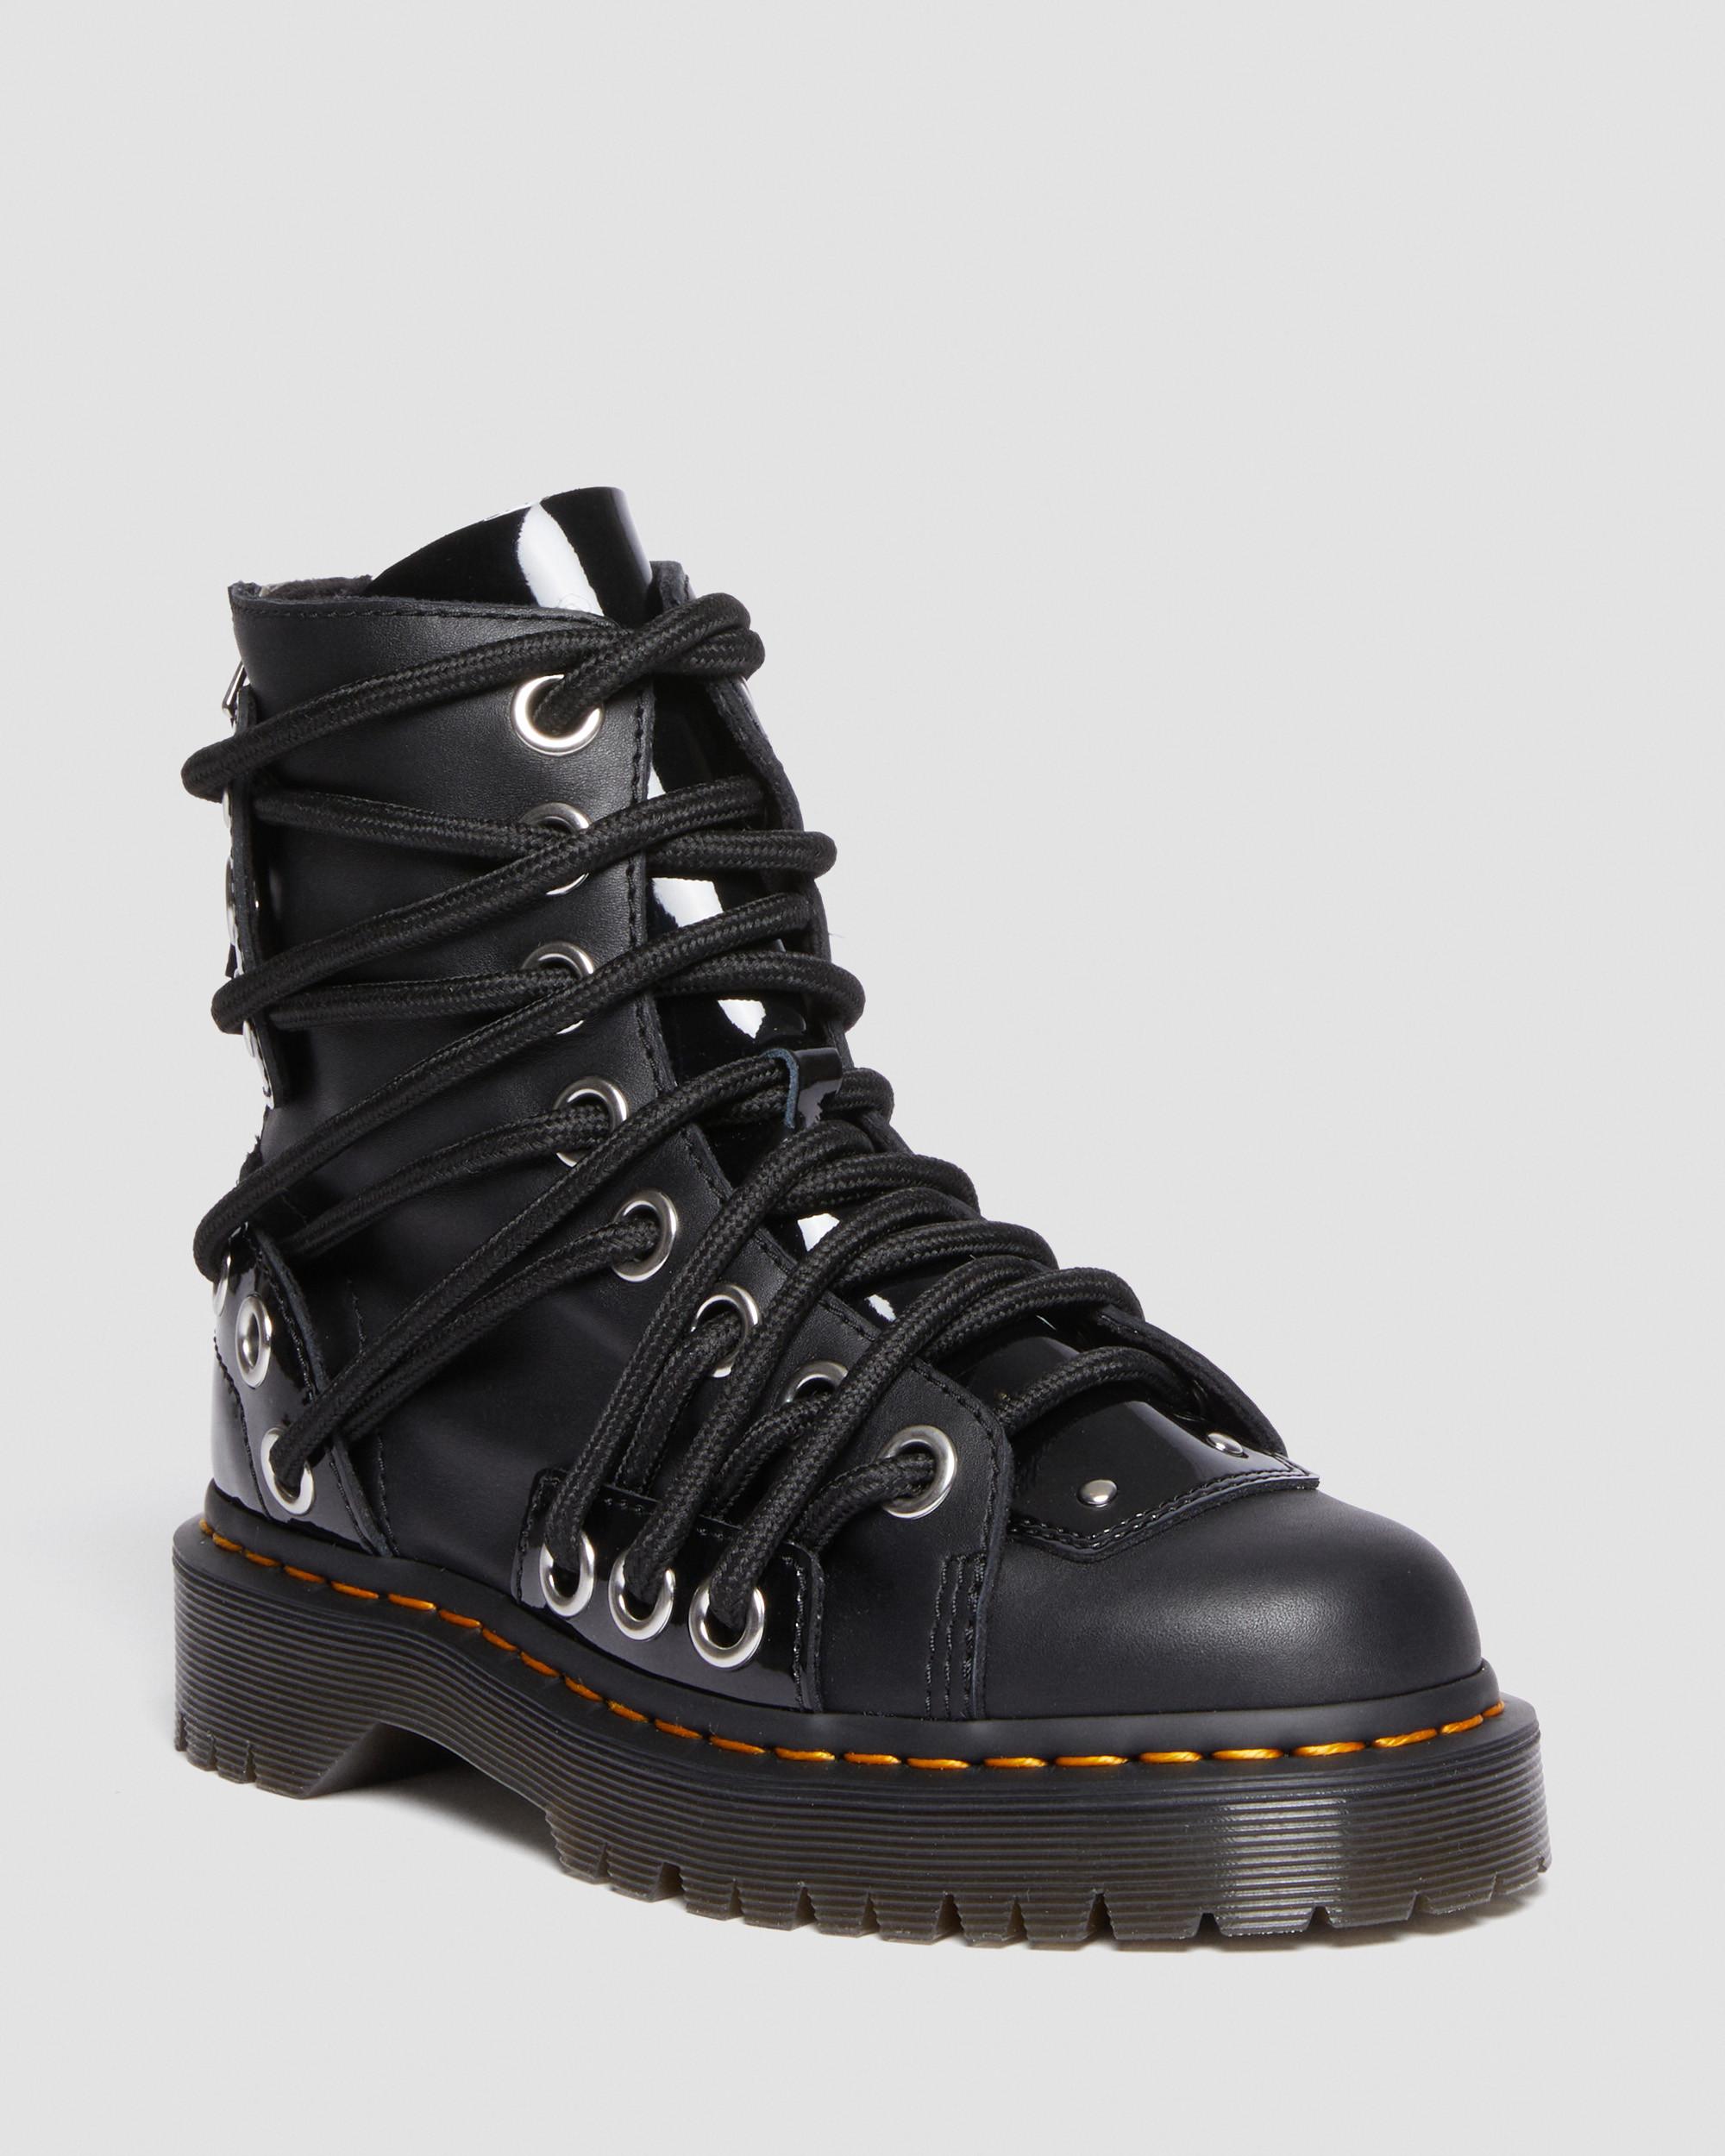 Daria Bex Lace Up Leather Boots in Black | Dr. Martens